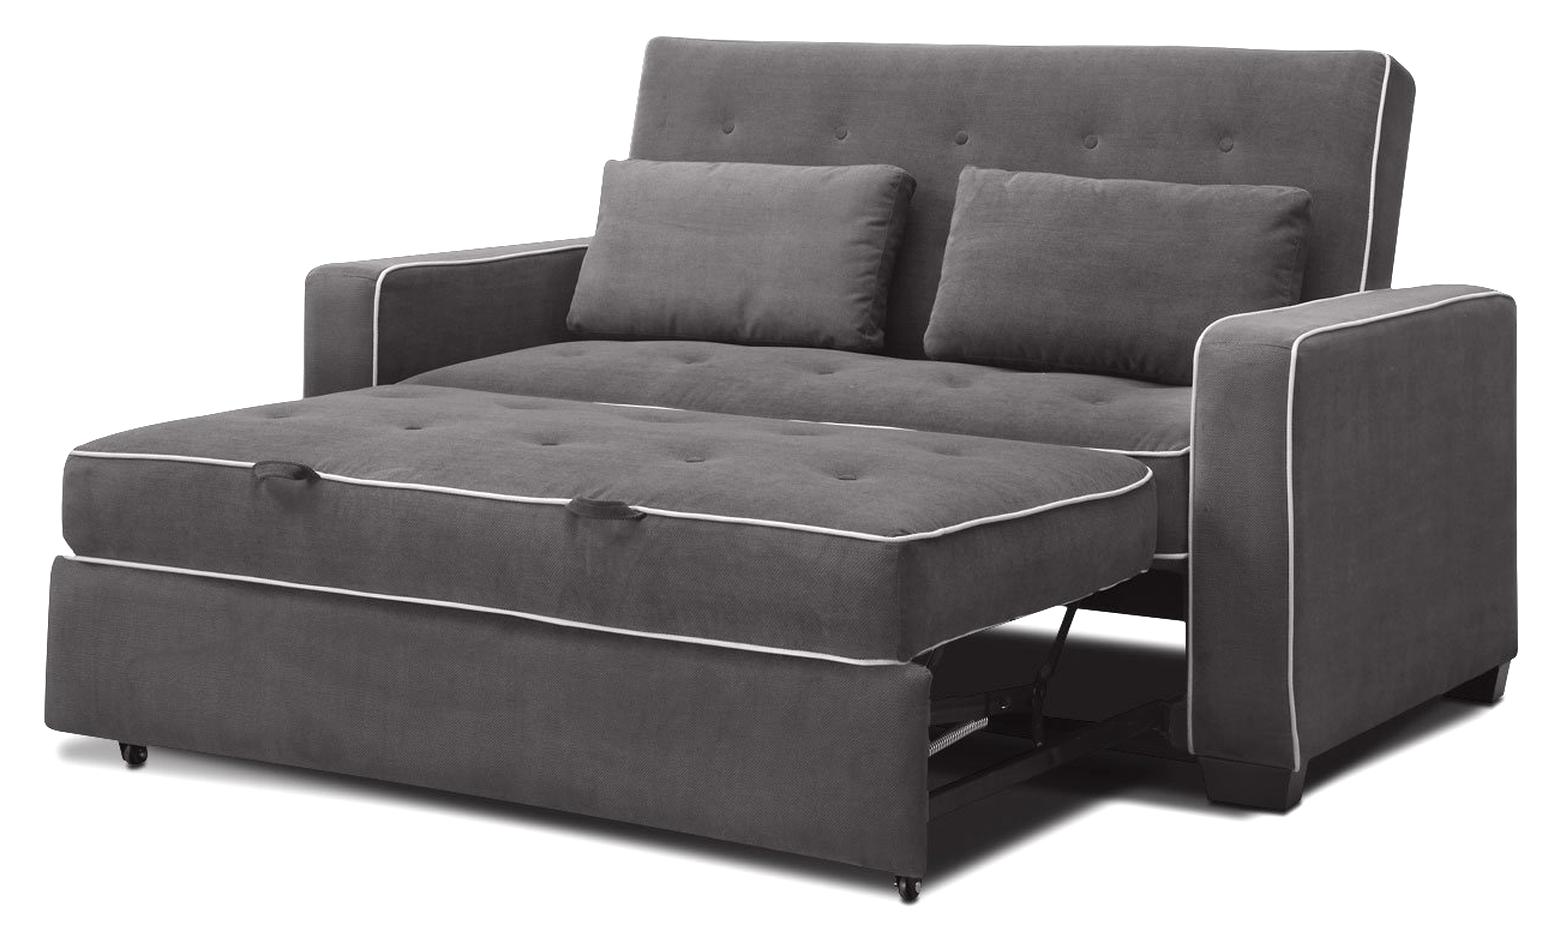 cheap sofa beds for sale uk